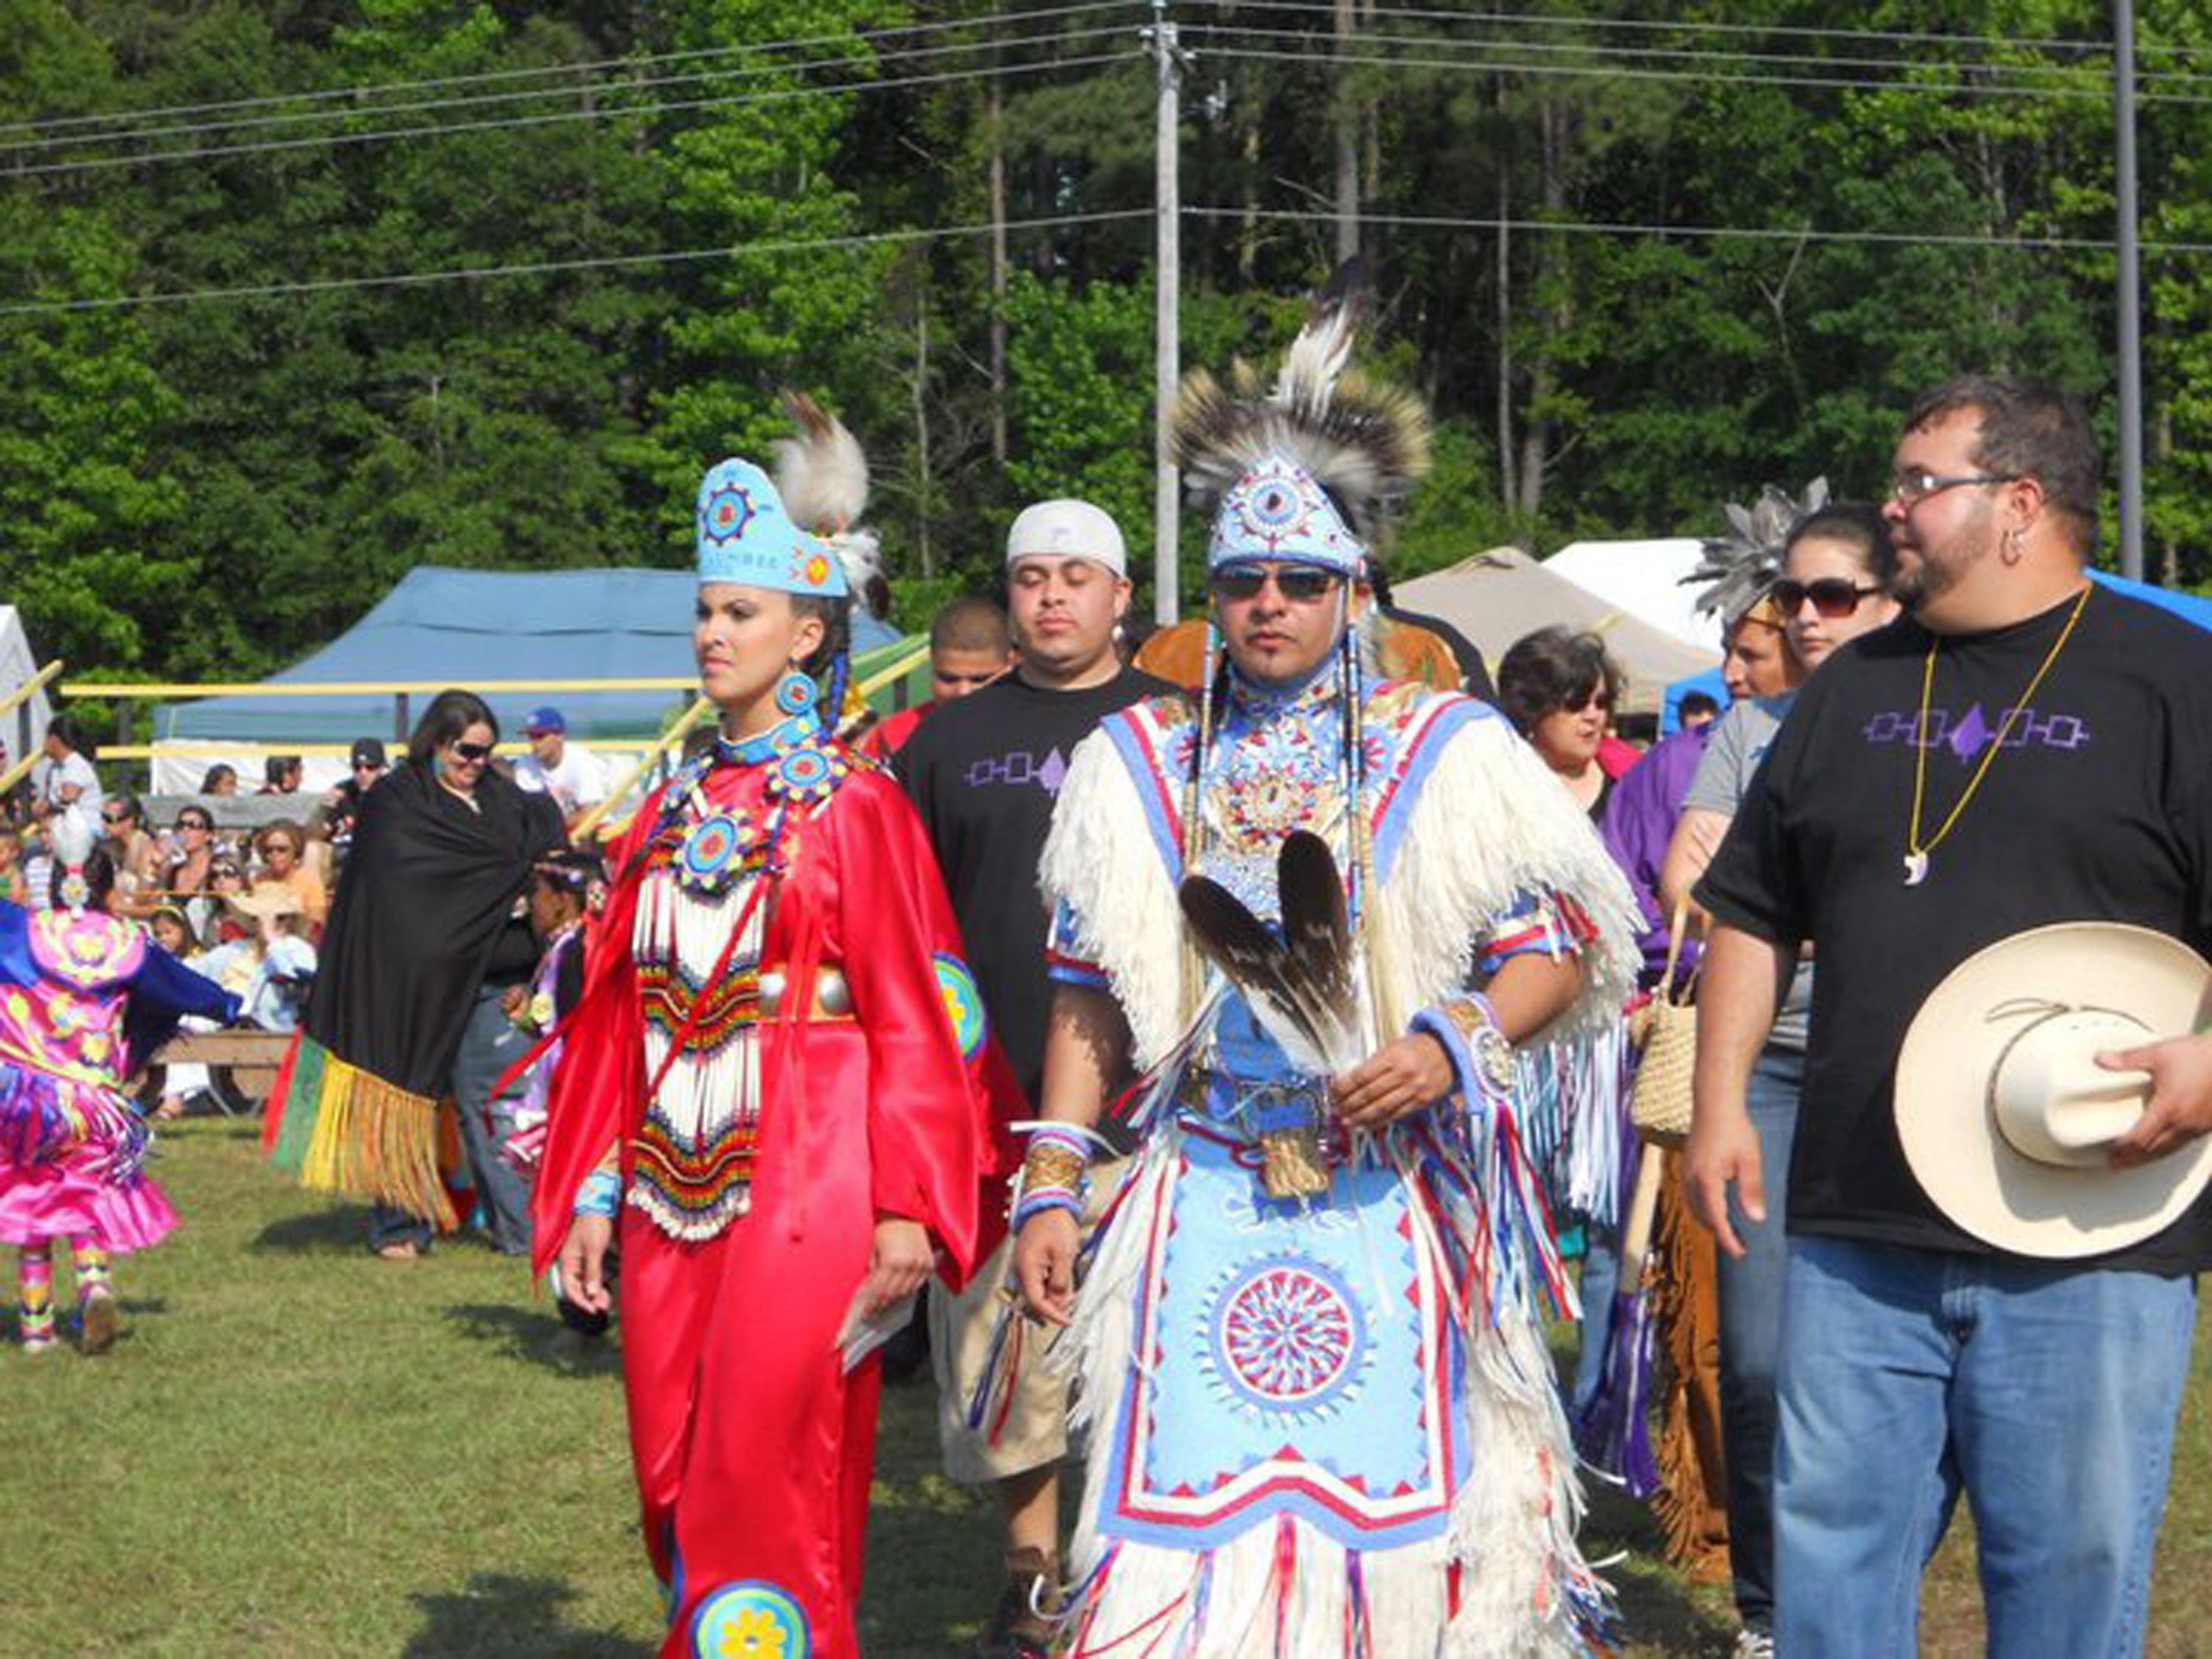 Rob Jacobs, center, a member of North Carolina's Lumbee Tribe, wore his eagle feathers at a Lumbee powwow.